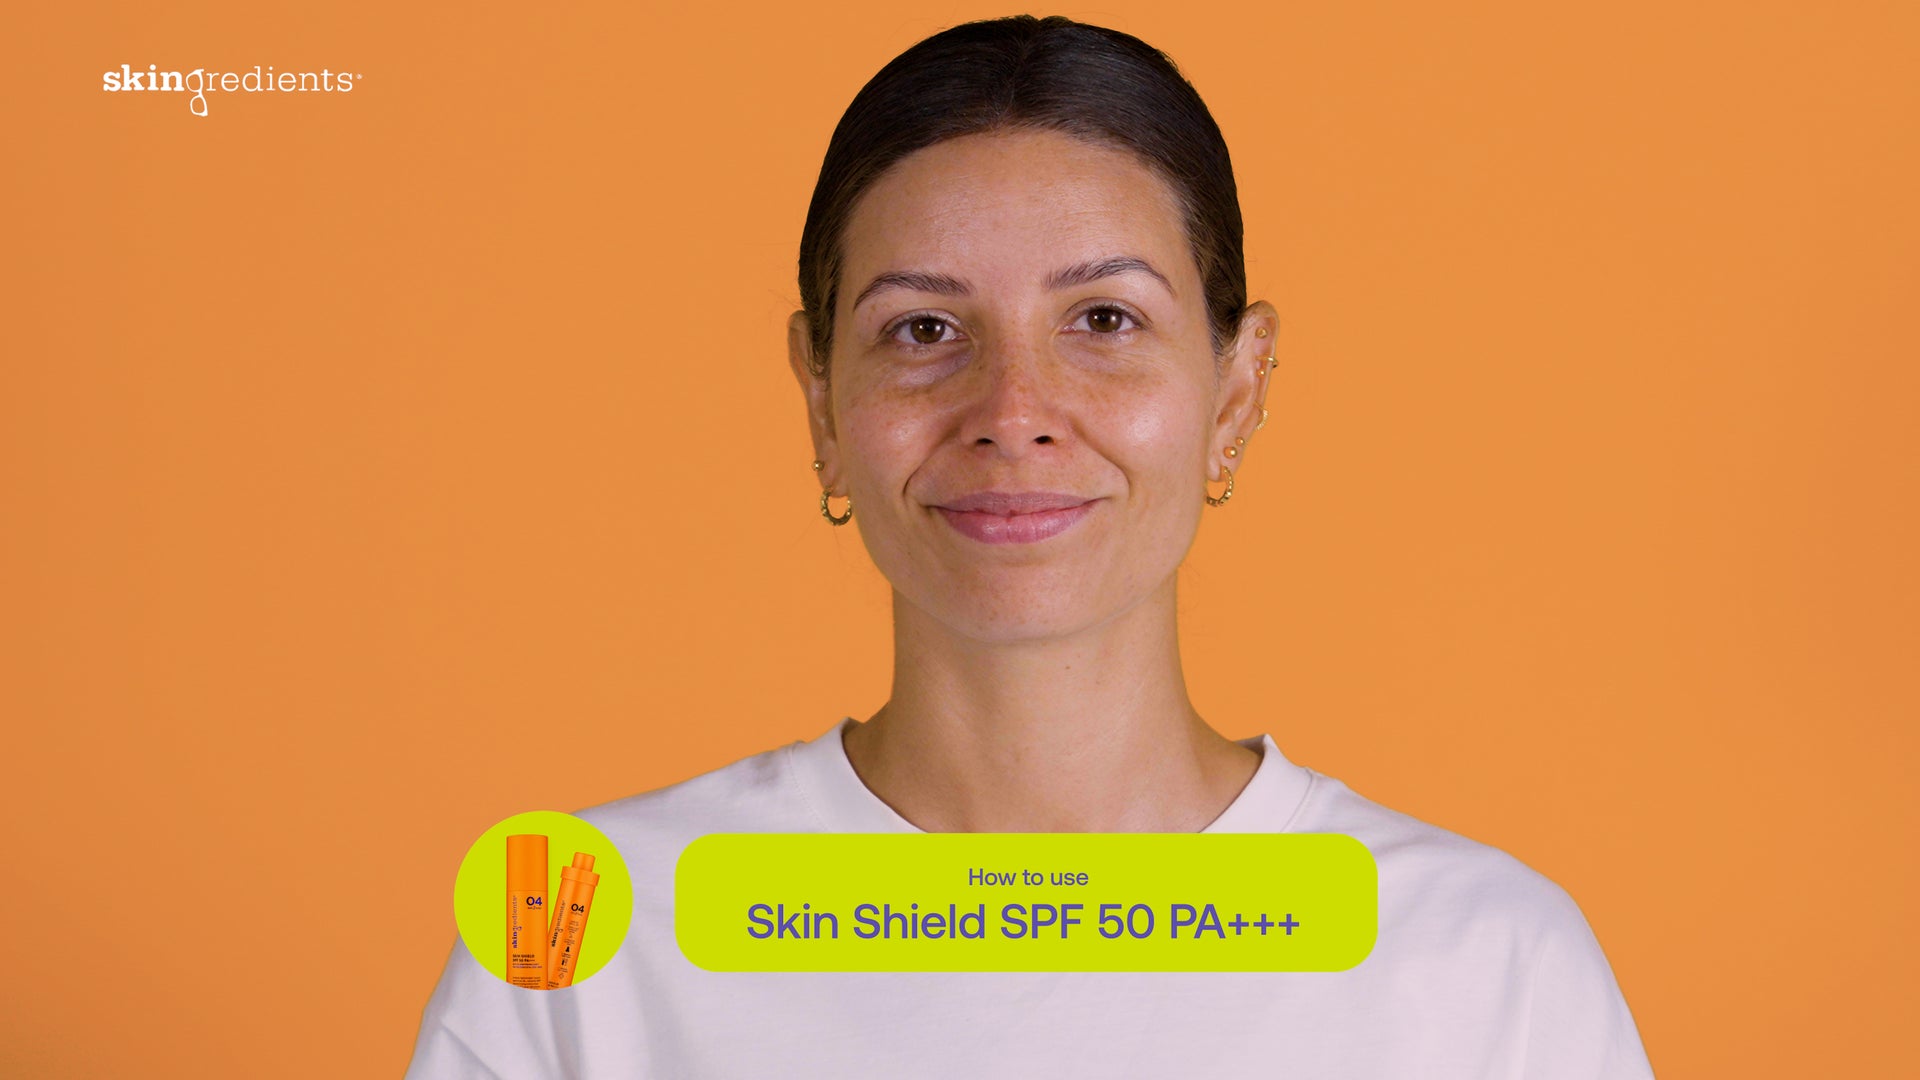 Load video: &lt;p&gt;A Skin Shield SPF 50 lover? Shop + save with this loyalty bundle containing x2 Skin Shield Moisturising + Priming SPF 50 PA+++ refills!&lt;/p&gt;
&lt;p&gt;&lt;strong&gt;This bundle includes:&lt;/strong&gt;&lt;br&gt;&lt;/p&gt;
&lt;p&gt;&lt;strong&gt;x2 Skin Shield Moisturising + Priming SPF 50 PA+++ refills. &lt;/strong&gt;Skingredients® Skin Shield SPF 50 PA+++ (73ml – this jumbo size will last you!) is your multi award-winning, broad-spectrum SPF that’ll protect your skin + lightly moisturise, while imparting a dewy finish + peachy tint. Our SPF has a legion of fans including expert makeup artists that adore its dewy finish and glow, glow, glow!&lt;br&gt; The 04 in our KeyFour range – Skin Shield is the ESSENTIAL final step in every AM skin recipe! Sitting perfectly under makeup with zero pill, it’s your lightweight mineral parasol that’ll shield (wink, wink) your skin from damaging UVA + UVB rays, blue light (aka HEV light) emitted from the sun + our screens, pollution and infrared. The ideal priming base, recently described by Youtuber + Makeup Artist Wayne Goss as “the holy grail of sunscreens.”&lt;/p&gt;
&lt;p&gt;For added skin benefits (because we don’t do anything by halves), you’ll find niacinamide – otherwise known as vitamin B3 – and vitamin E for the antioxidant protection against pesky environmental aggressors. Plus, trust the moisturising addition of allantoin to smooth the skin. It is non-comedogenic, oil-free, water-resistant and non-greasy, and what’s more, there’s no need to stress about a chalky white cast and photo flashback.&lt;/p&gt;
&lt;p&gt;&lt;strong&gt;NERDIE NOTE:&lt;/strong&gt; YOU MUST HAVE PURCHASED YOUR PRIMARY PACK BEFORE SWITCHING TO OUR VALUE-SAVING PLANET-FRIENDLY REFILLS!&lt;/p&gt;